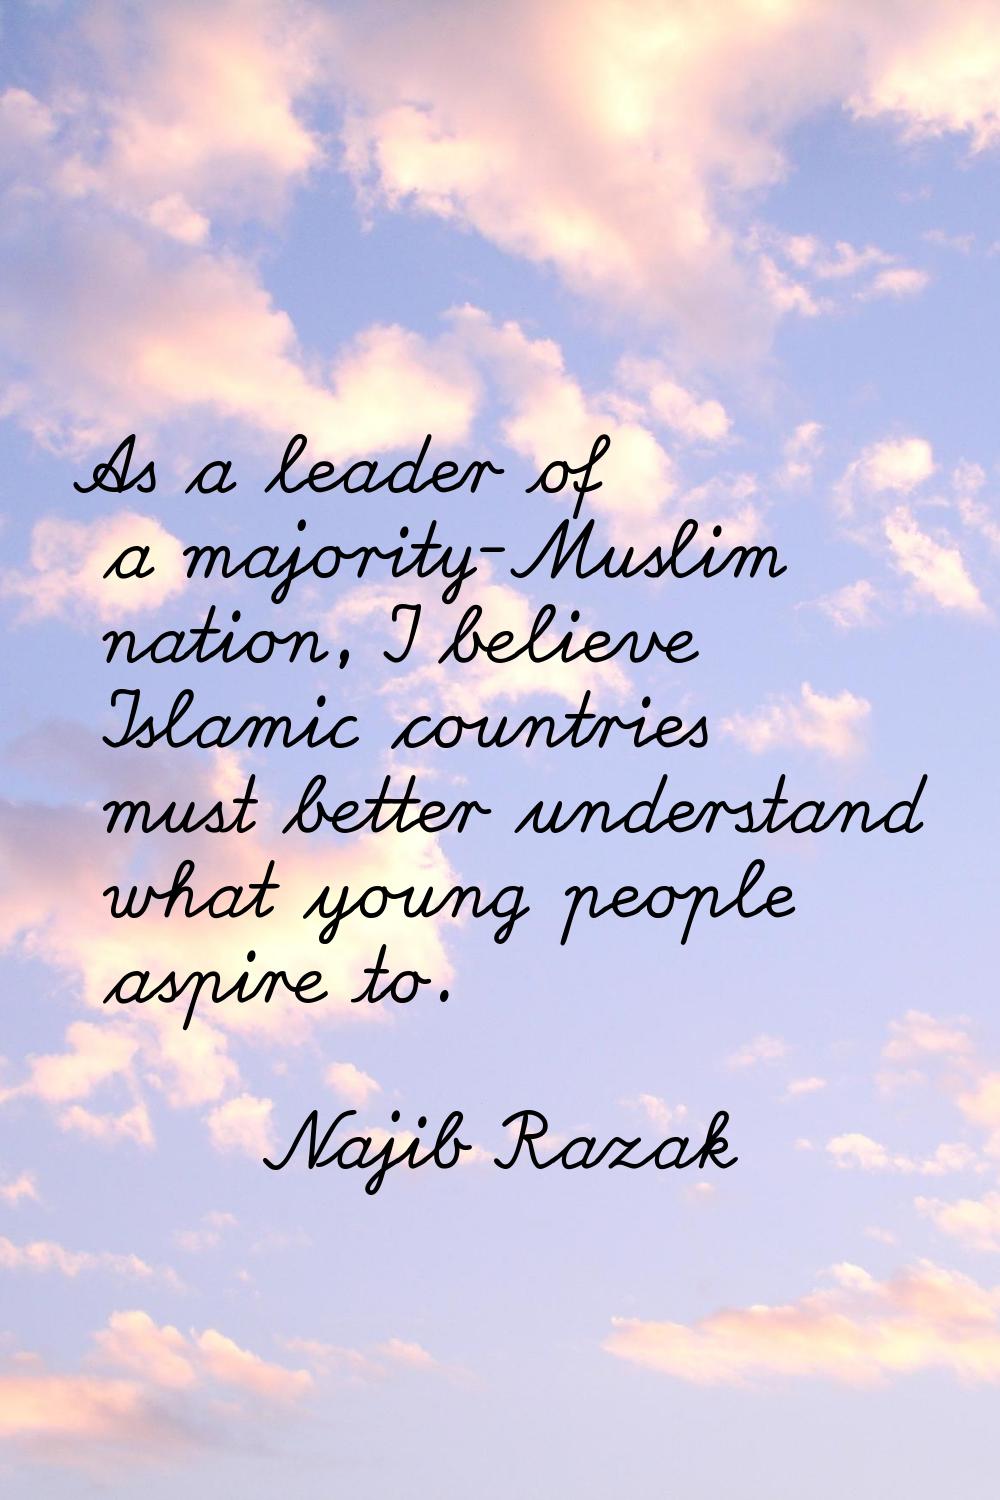 As a leader of a majority-Muslim nation, I believe Islamic countries must better understand what yo